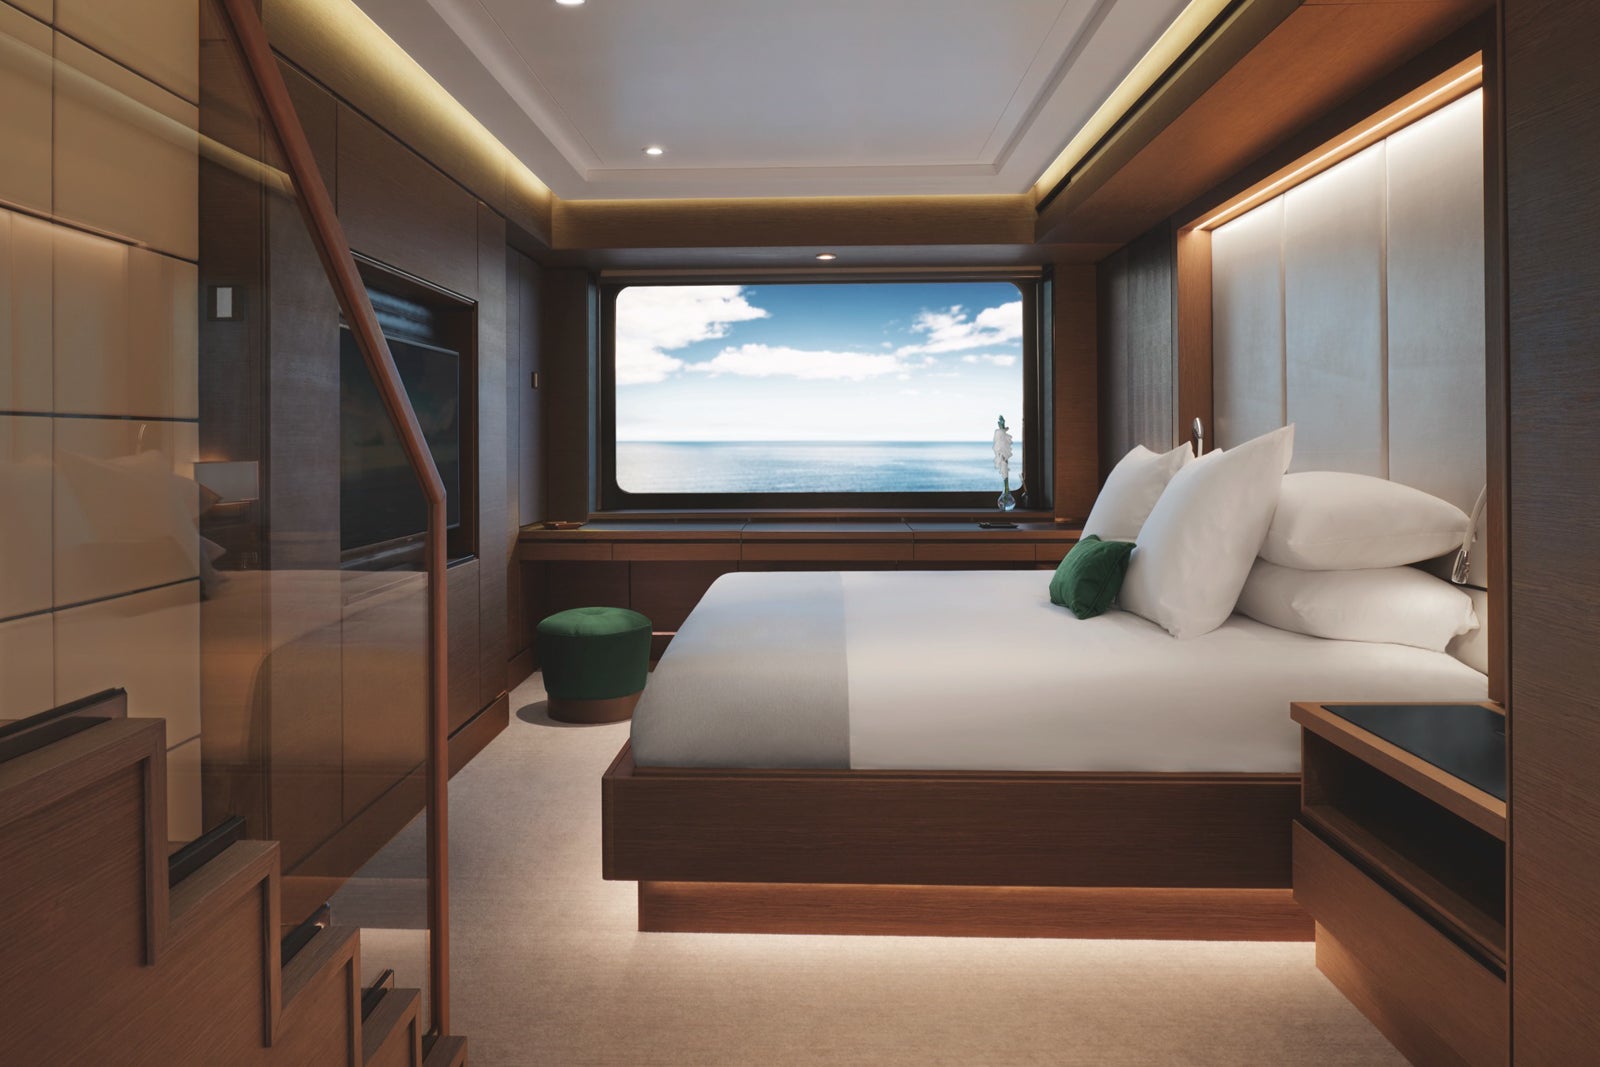 2-story Loft Suite bedroom aboard Evrima. The Ritz-Carlton Yacht Collection